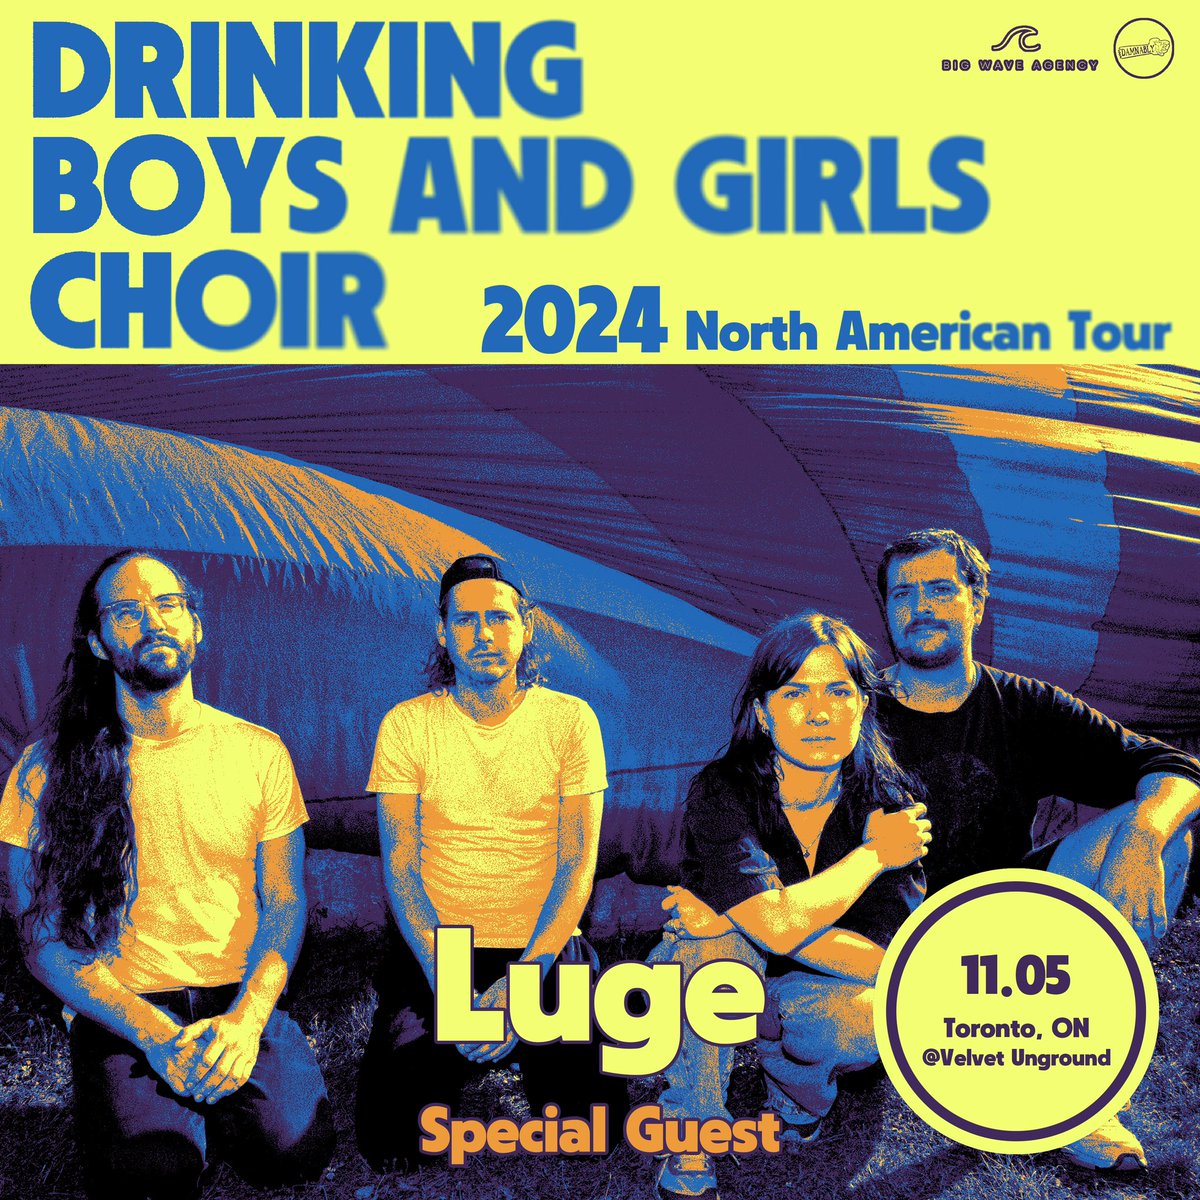 PLEASE meet the special guests you can see on our headline North American Tour. We are so excited to announce the incredible local special guests!!!! Grab YR Ticket Right Now!!!!!🎟️ drinkingboysandgirlschoir.com/tour/